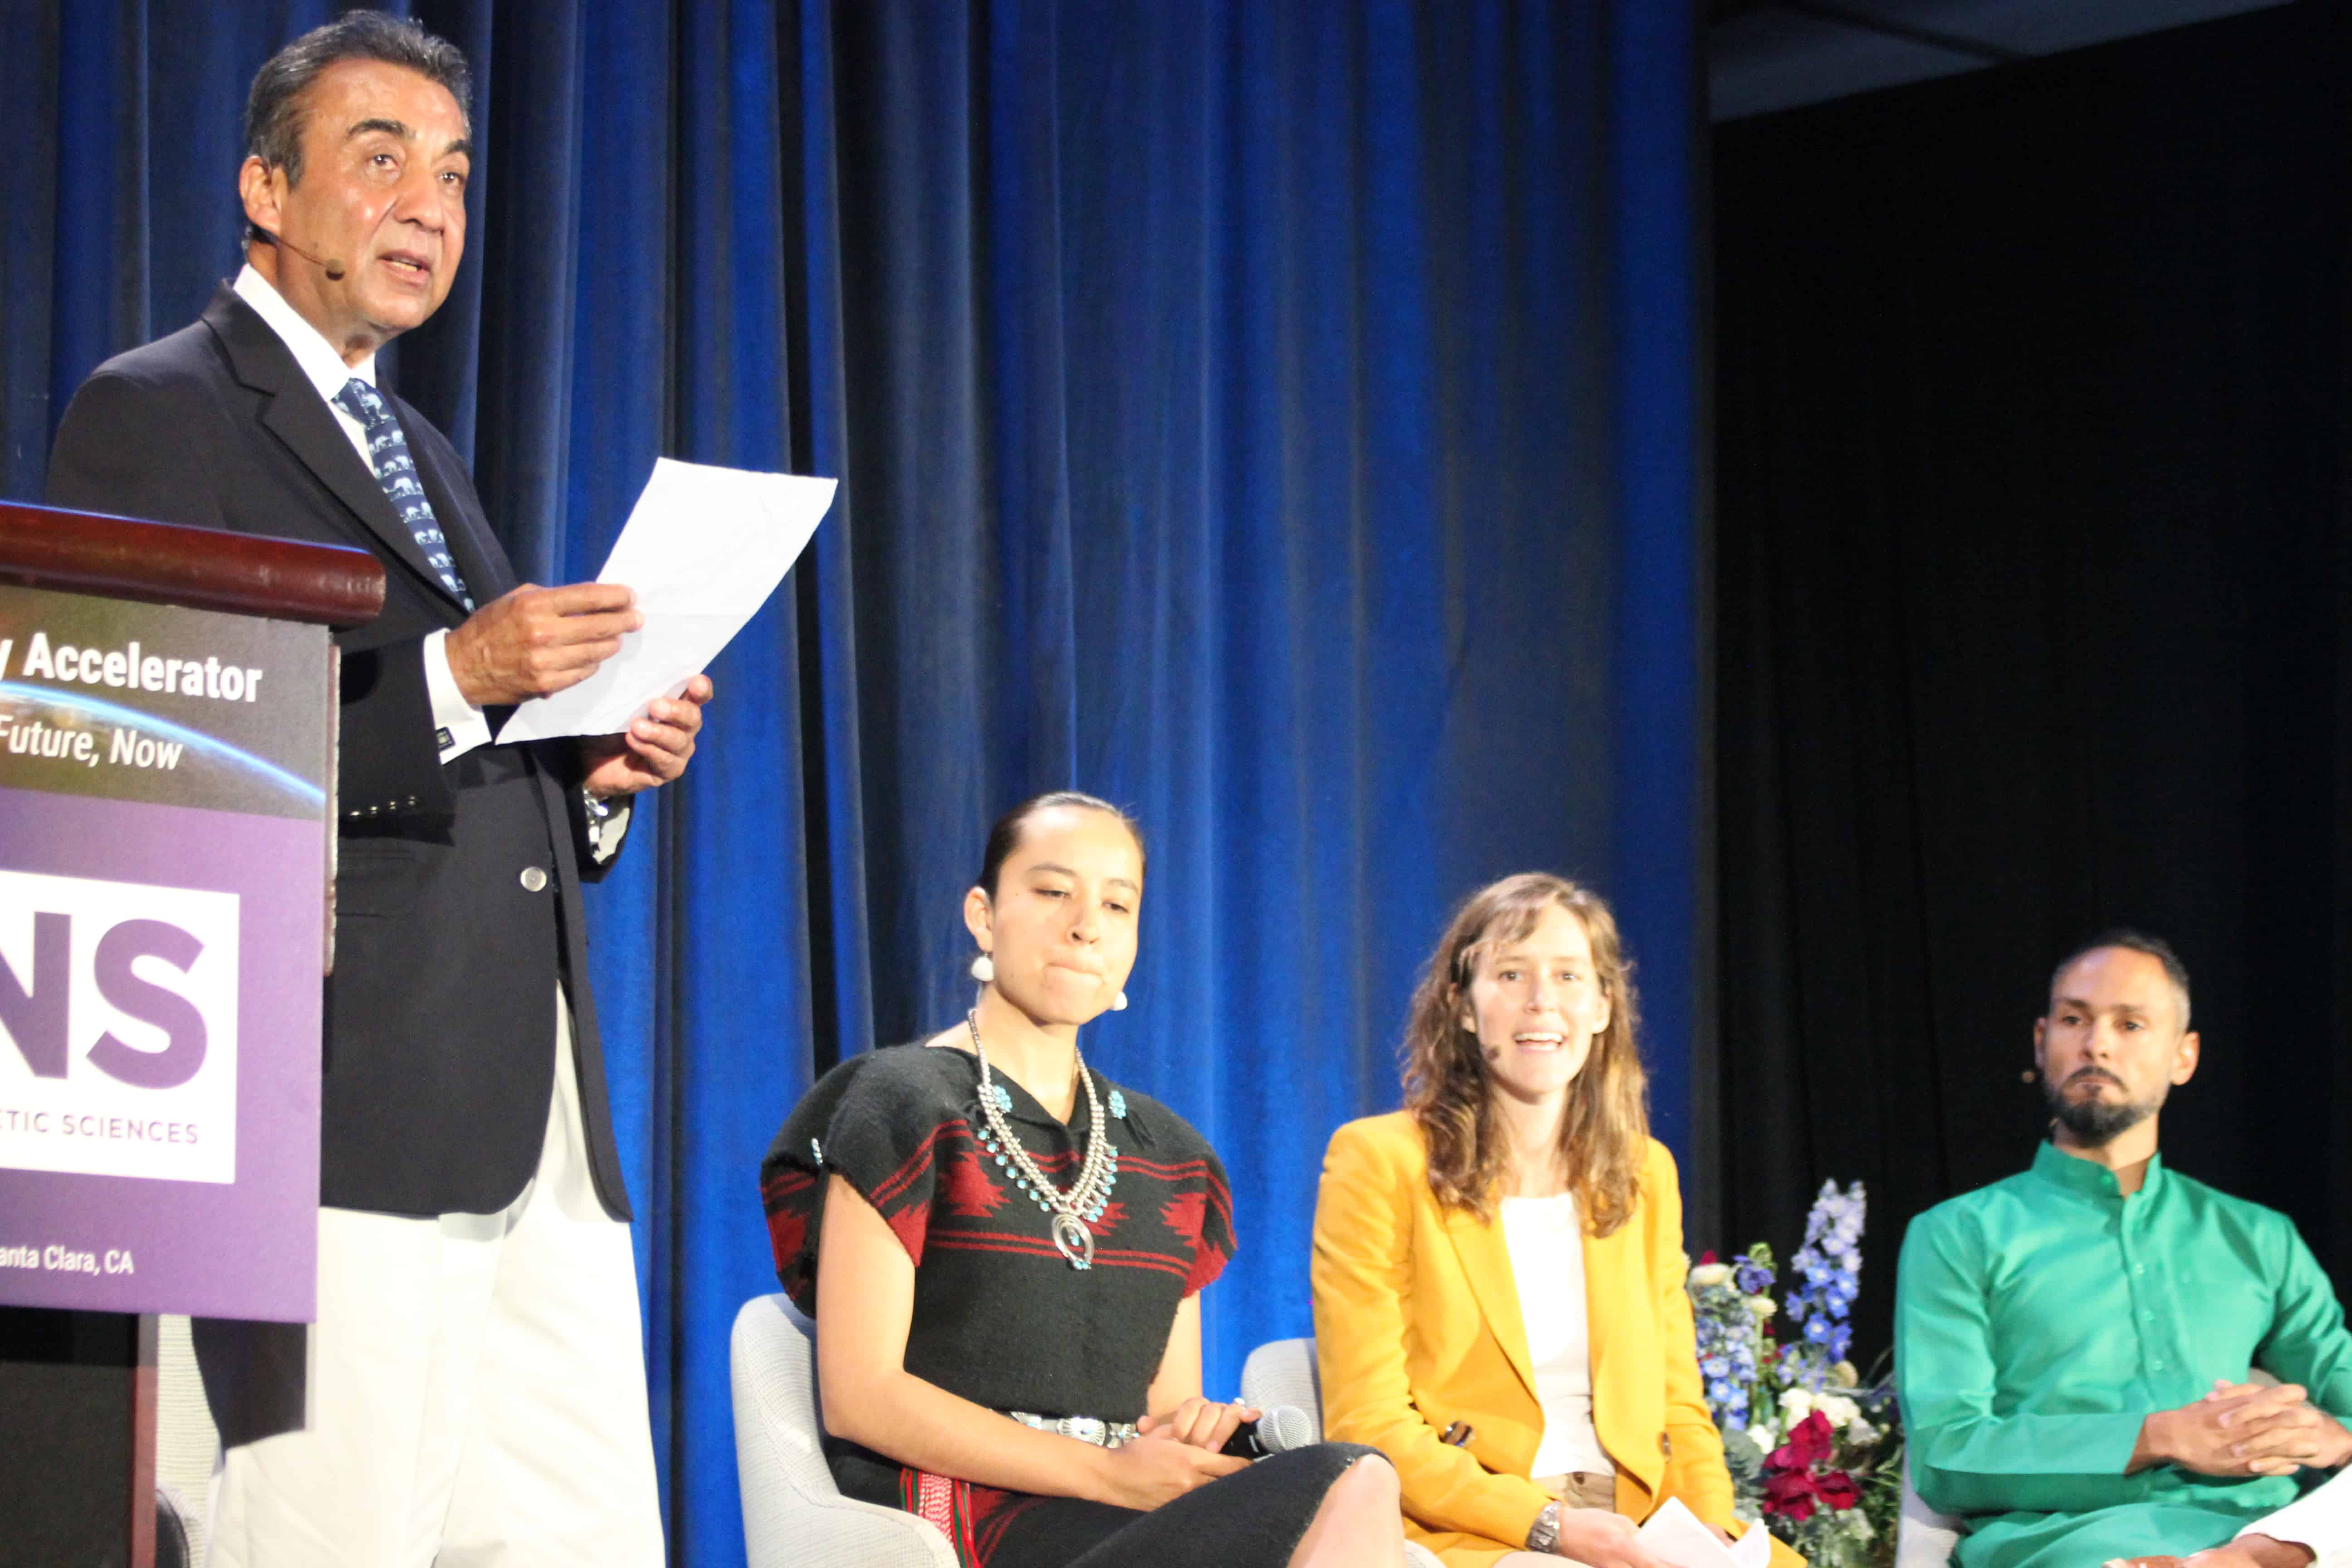 Azim Khamisa also presented the NextGen Consciousness in Action Awards to Lyla June, Jewel Love and Sarah Peck.